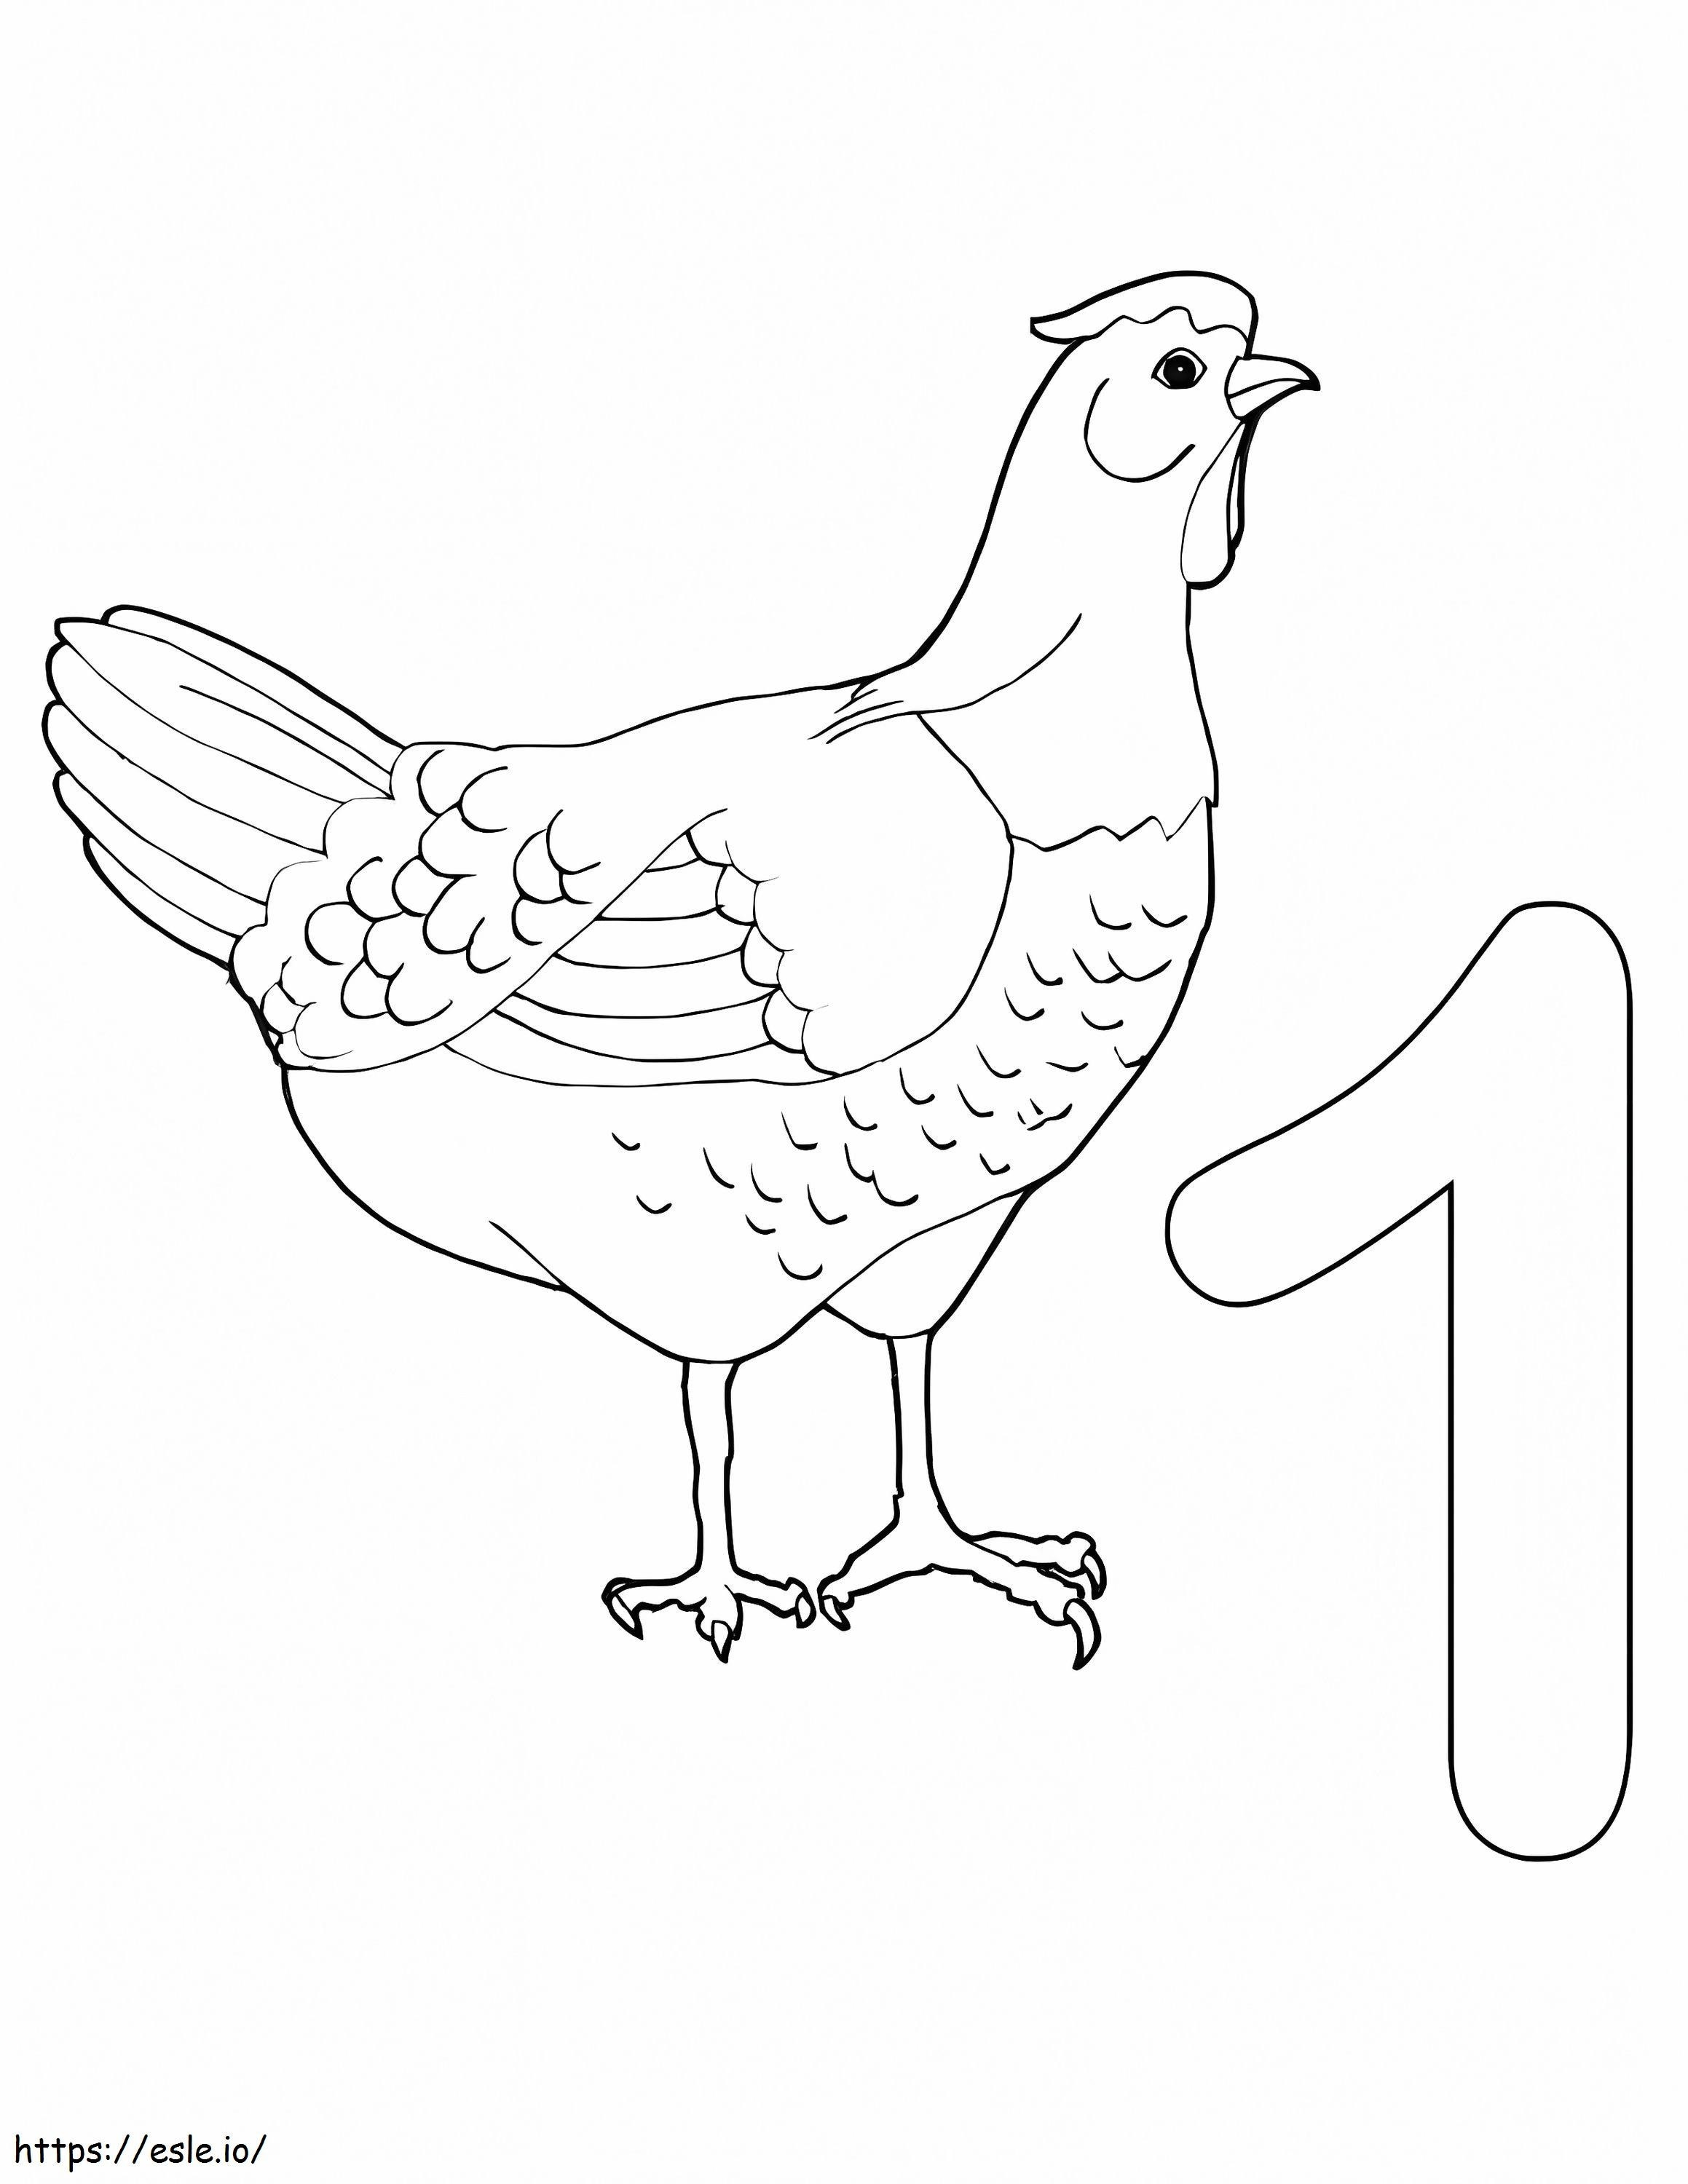 Number 1 And Chicken coloring page